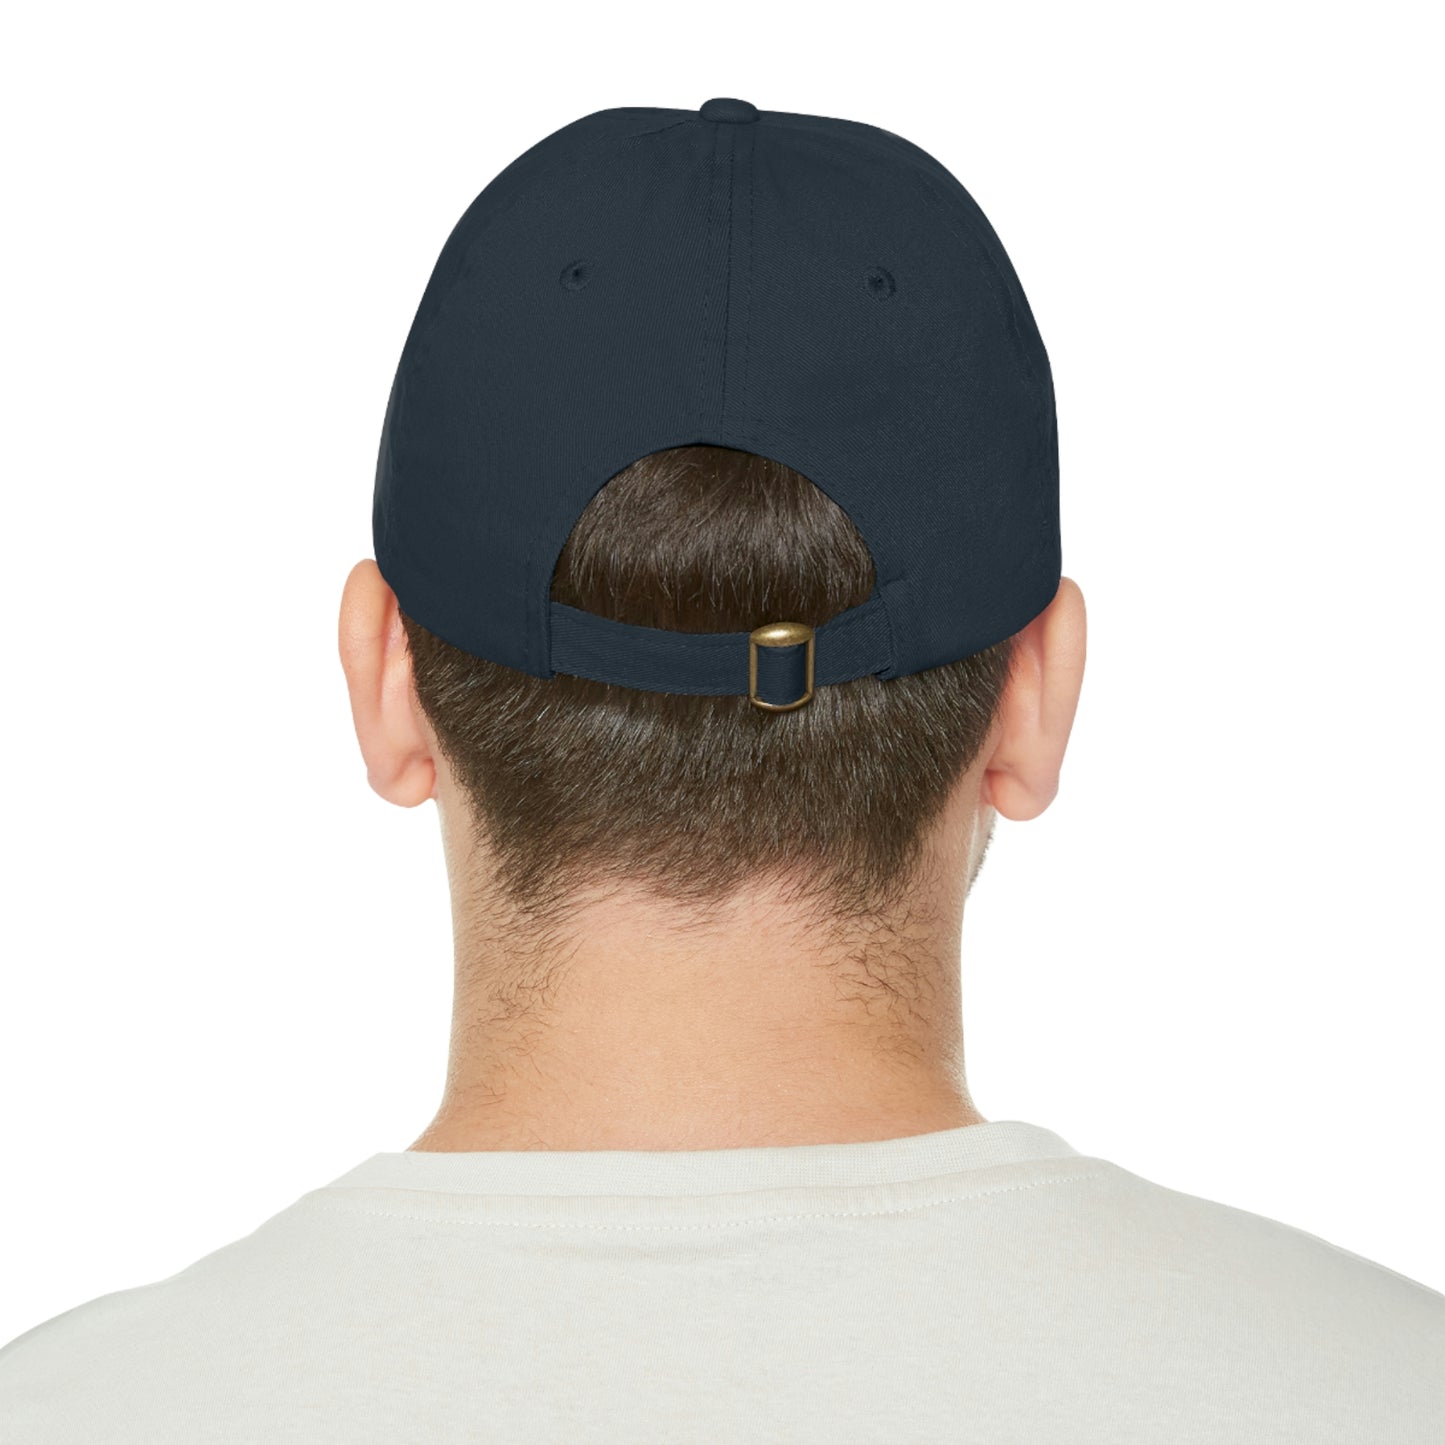 Old Man Tom's "Hey!" Dad Hat with Leather Patch